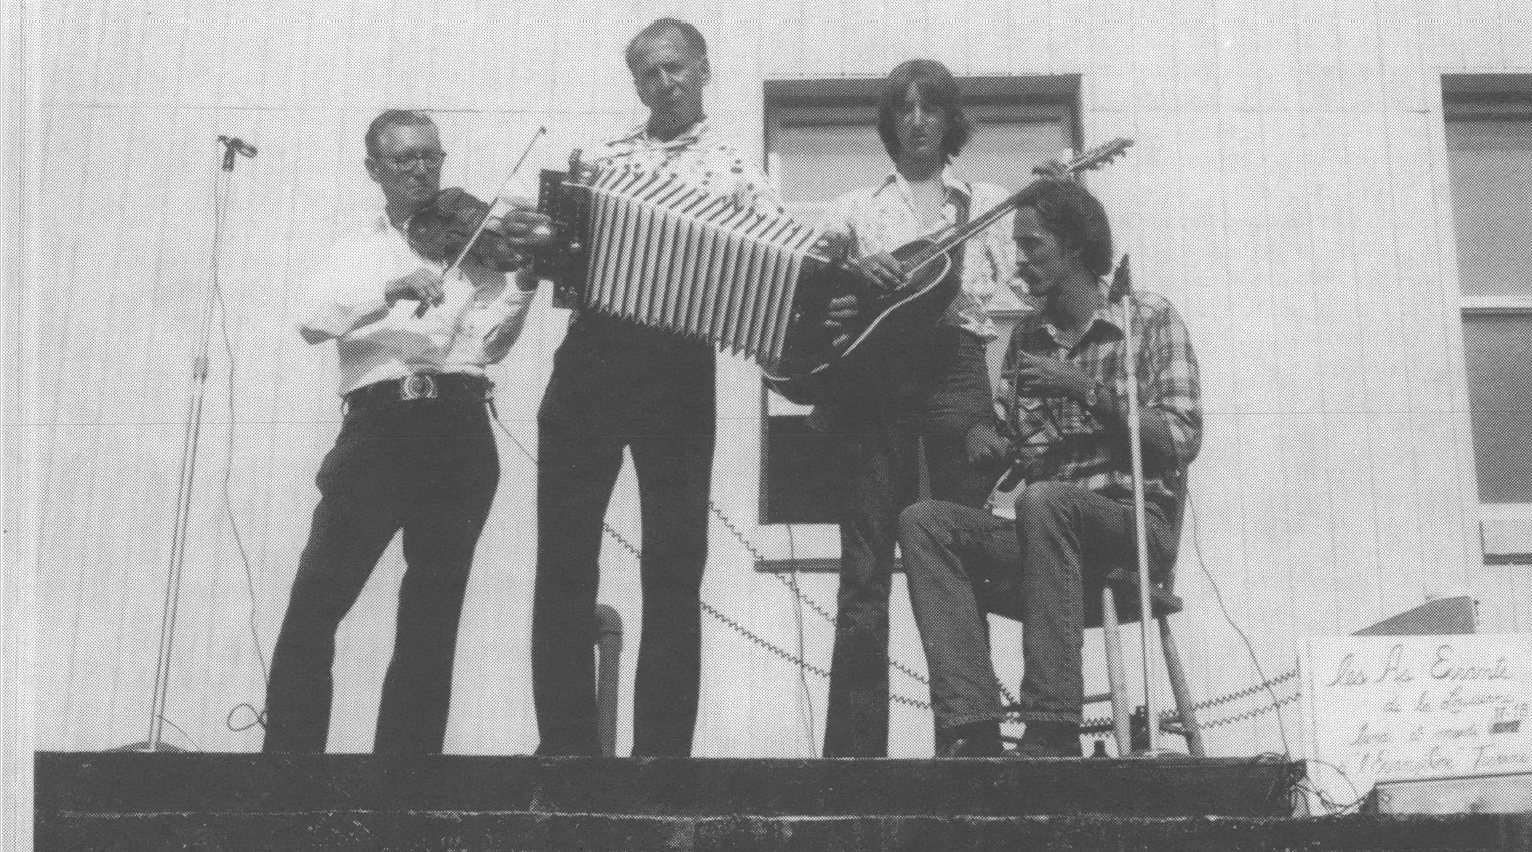 Photo of band with guitar, accordion, fiddle playing on stage